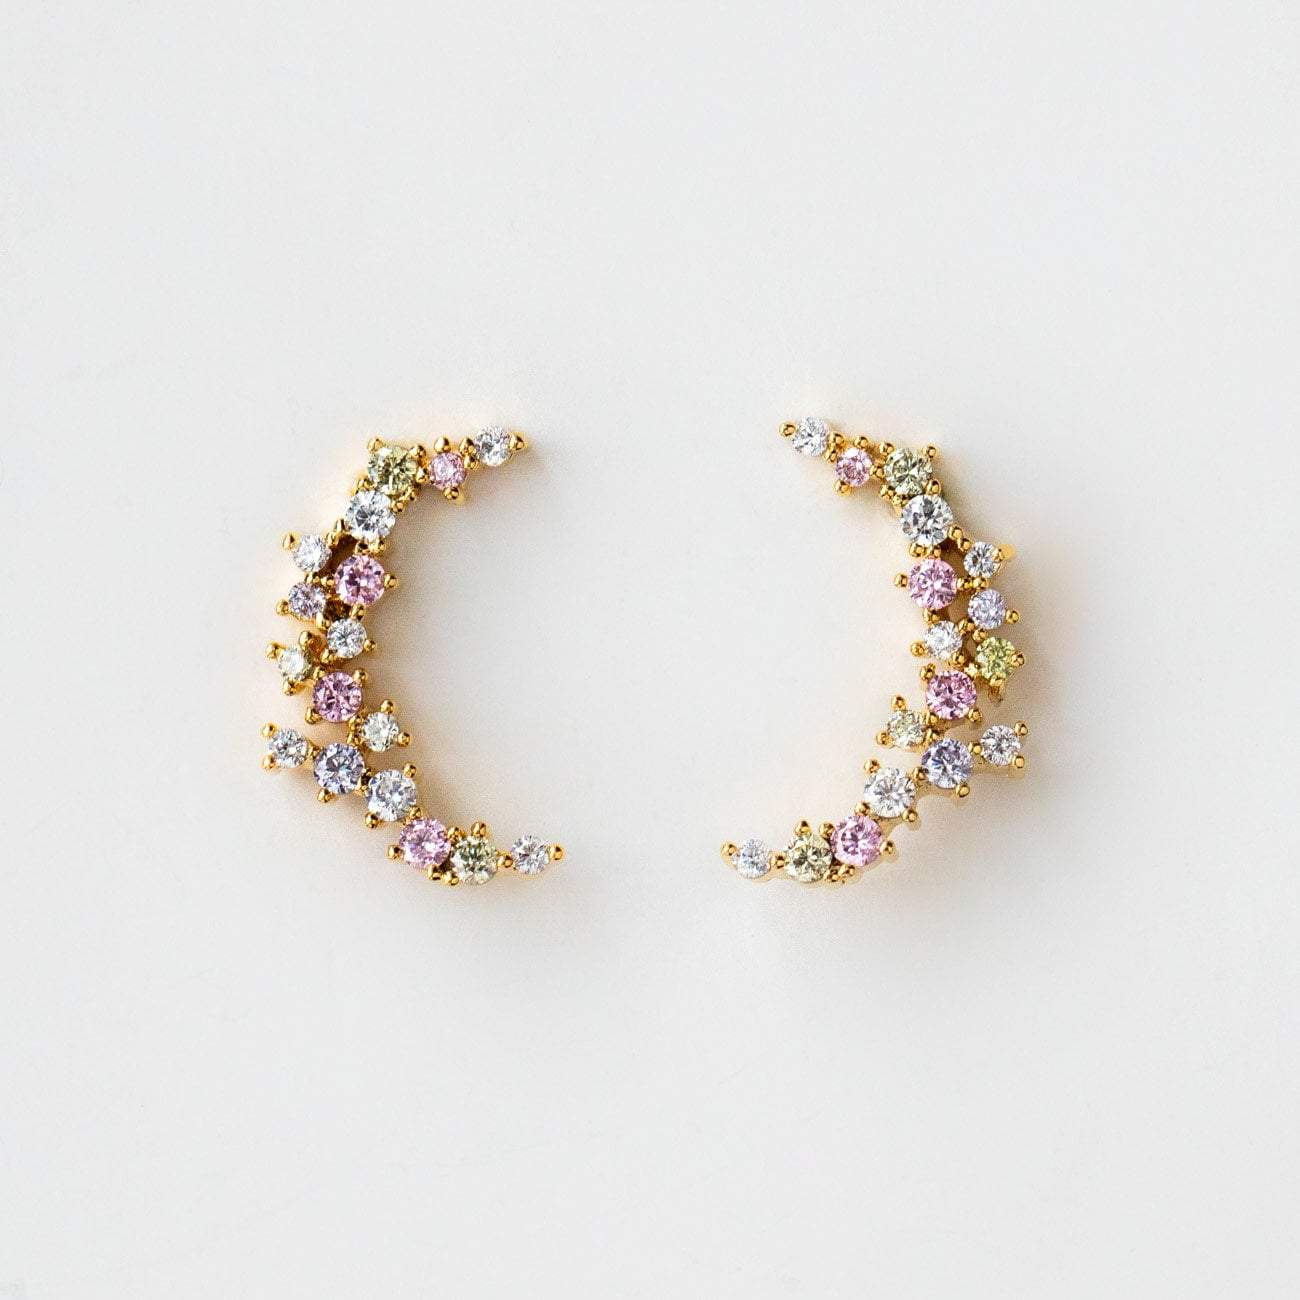 Local Eclectic One and Only Crescent Moon Stud Earrings